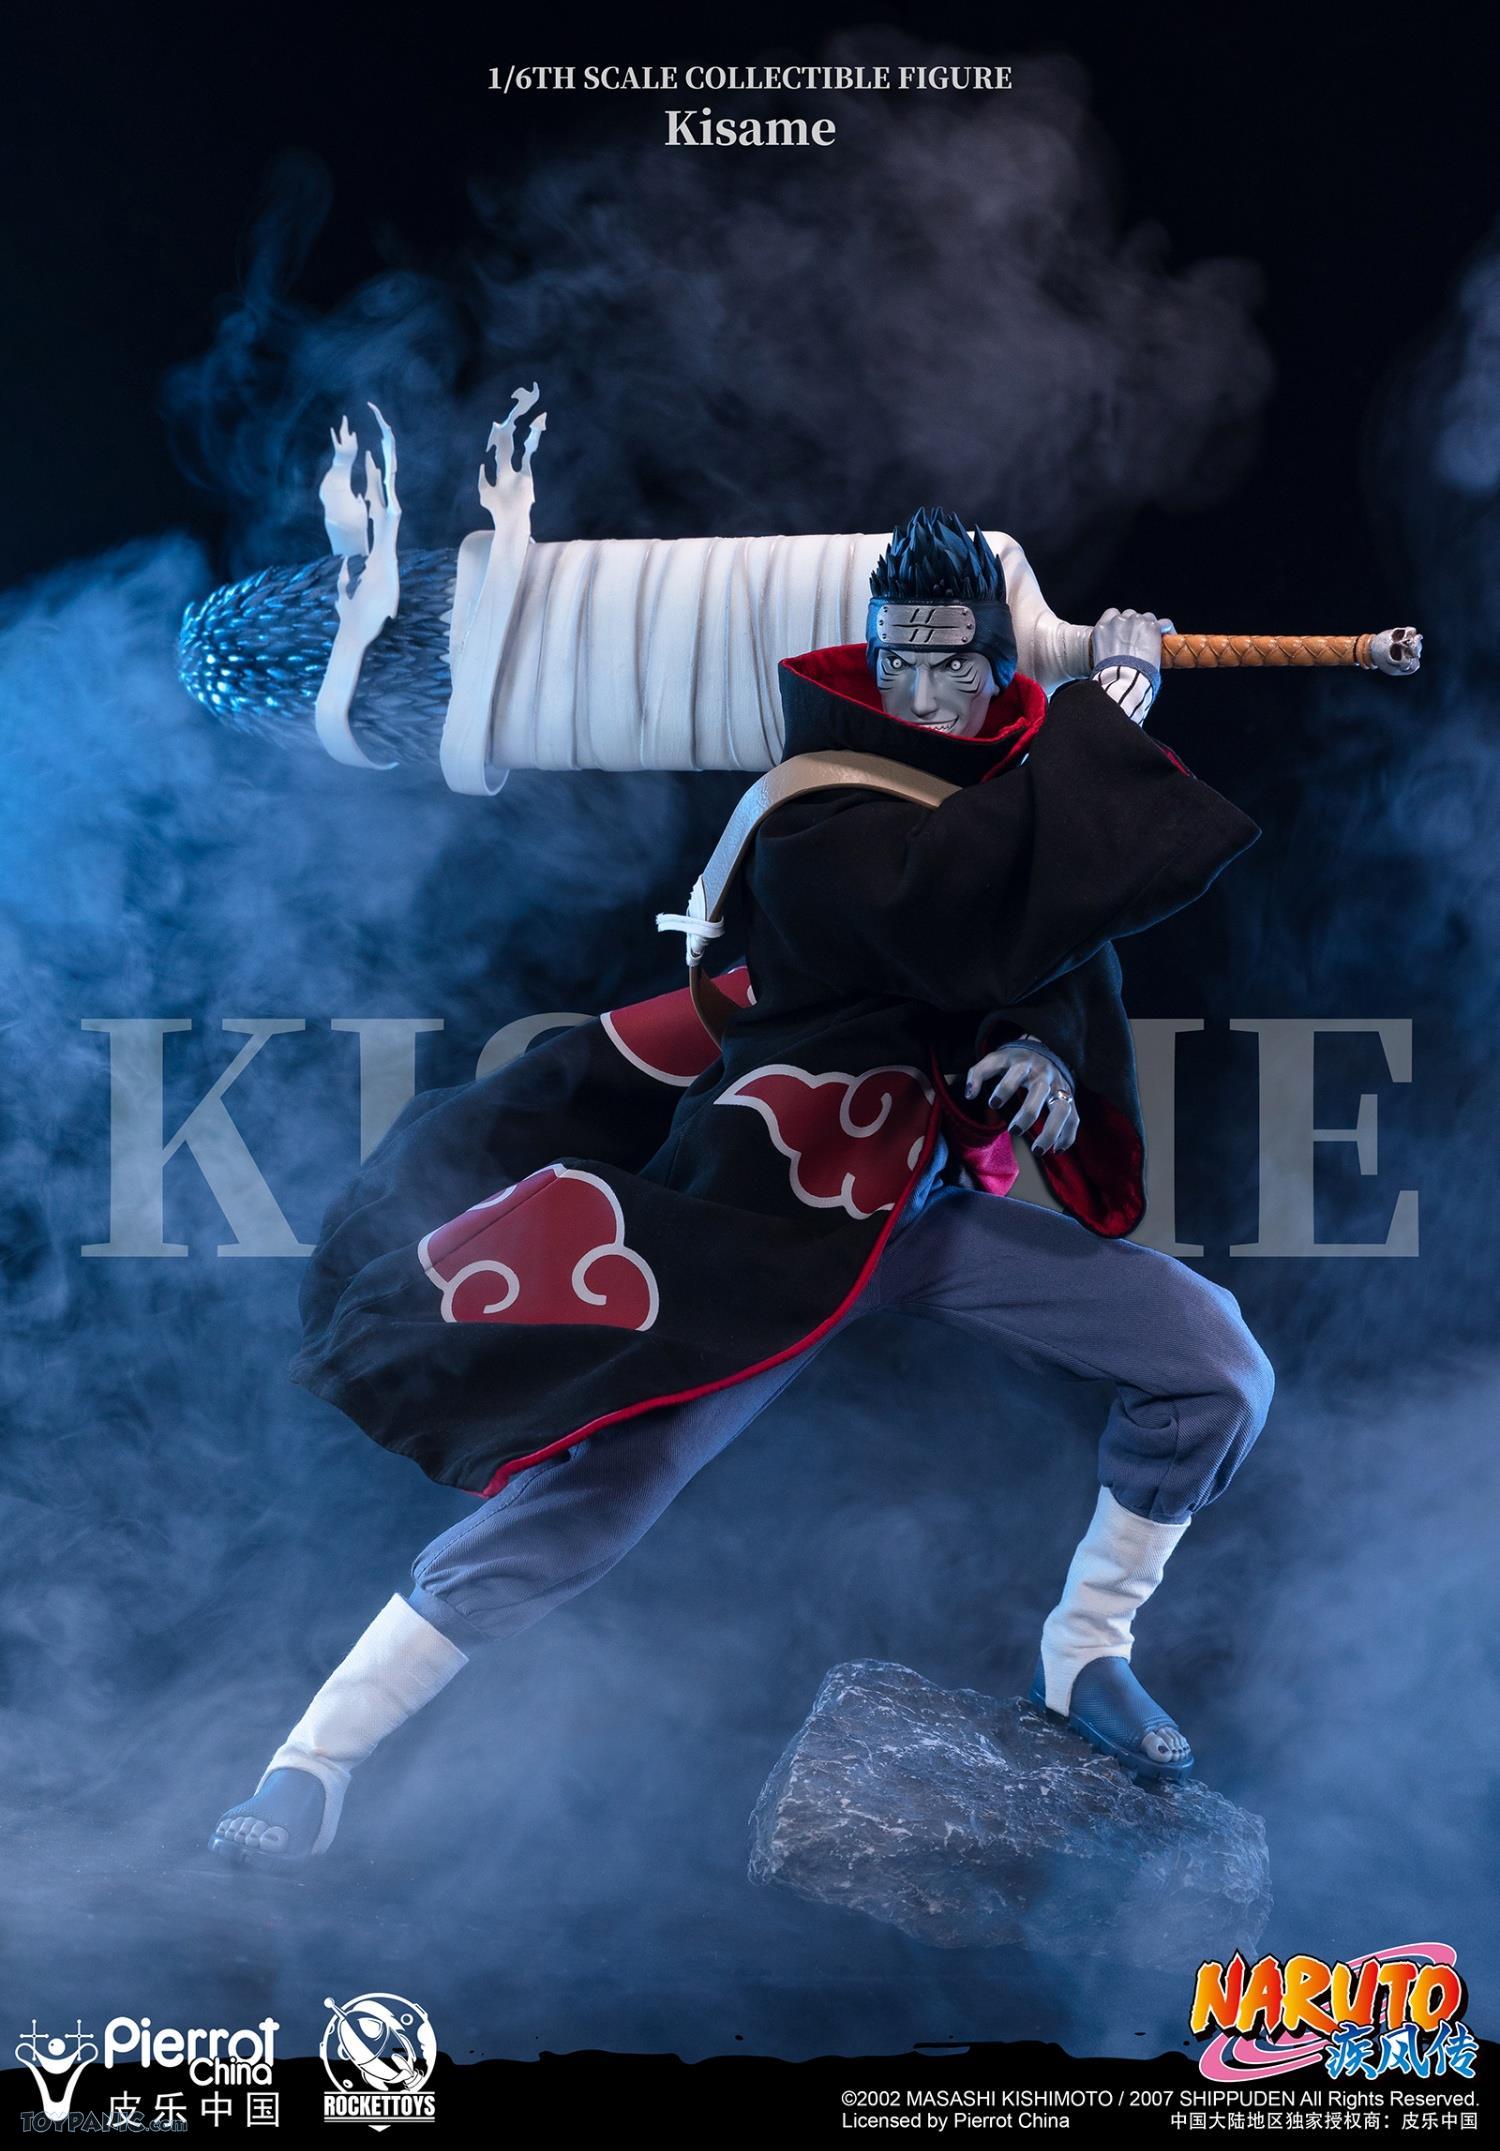 rockettoys - NEW PRODUCT: Rocket Toys ROC-007 1/6 Scale Kisame 221202460434PM_6591732